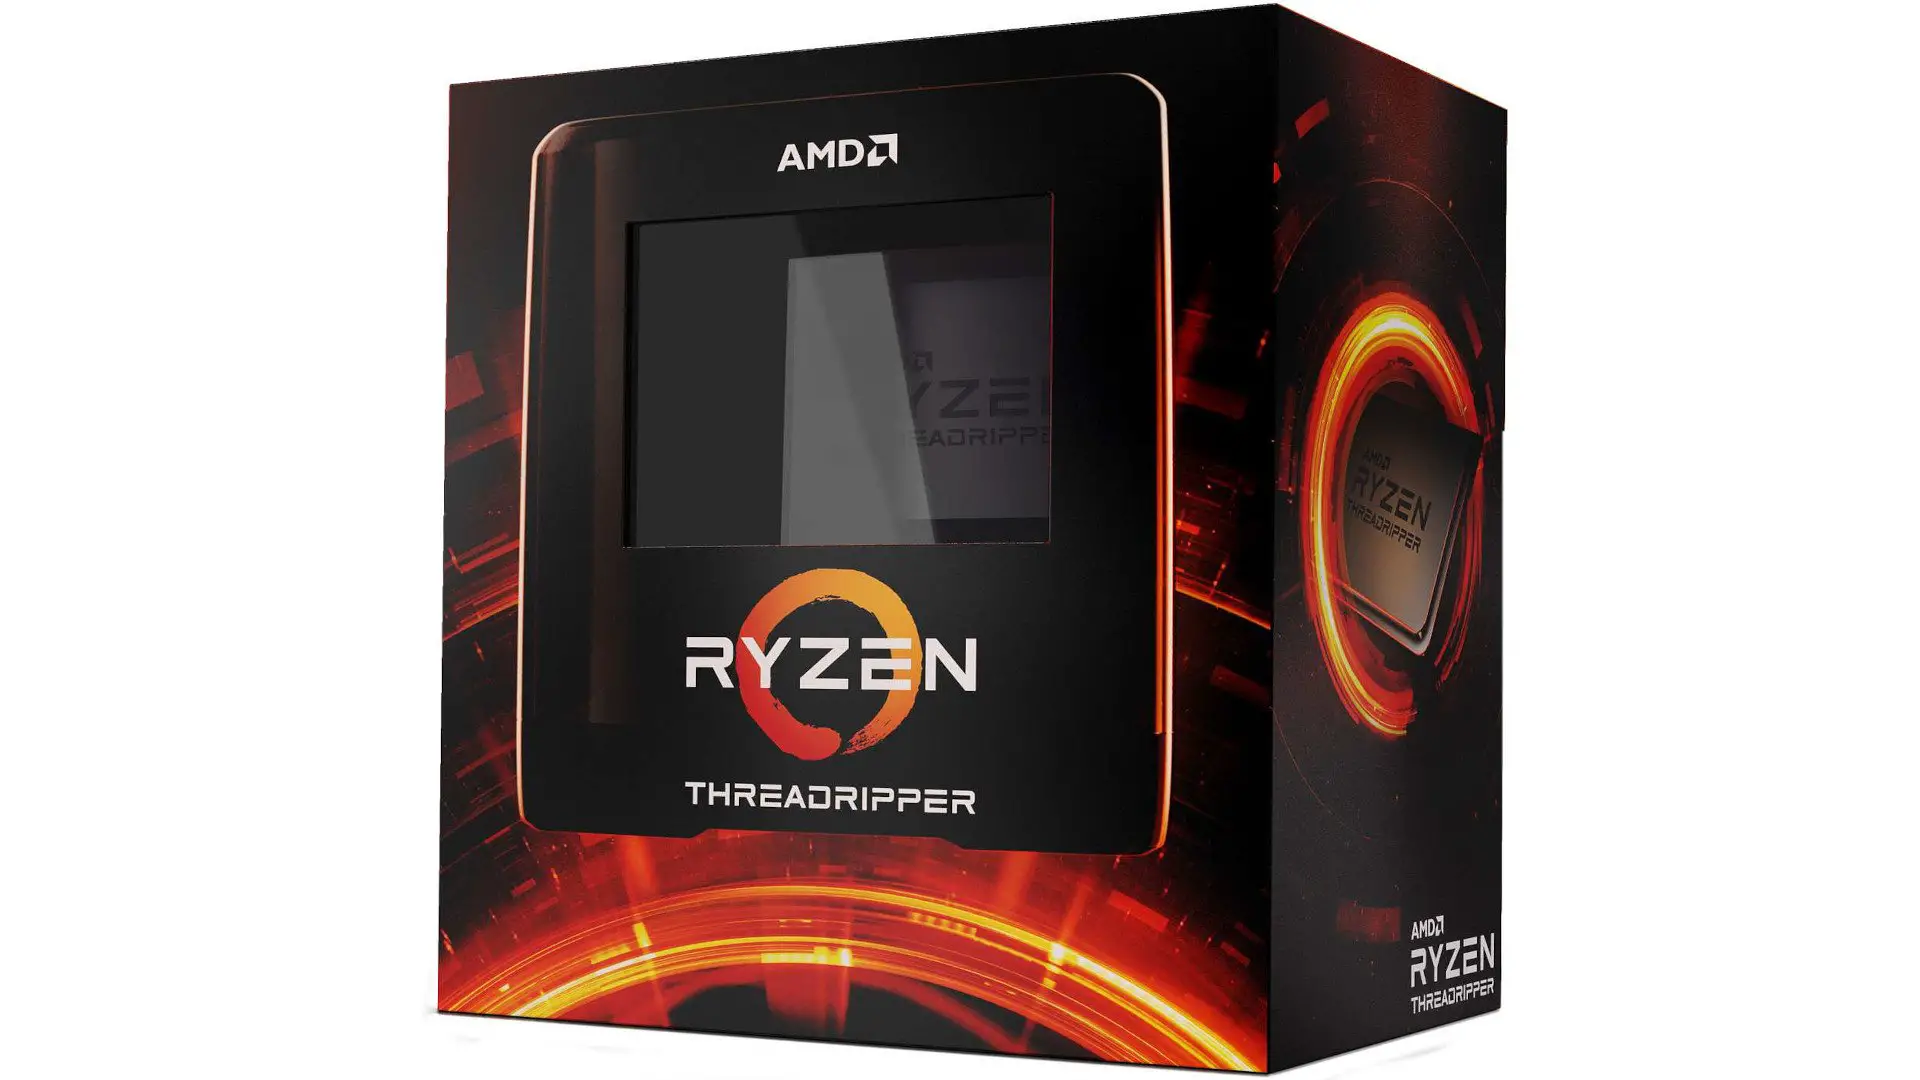 You are currently viewing AMD Ryzen TR 3970X Review